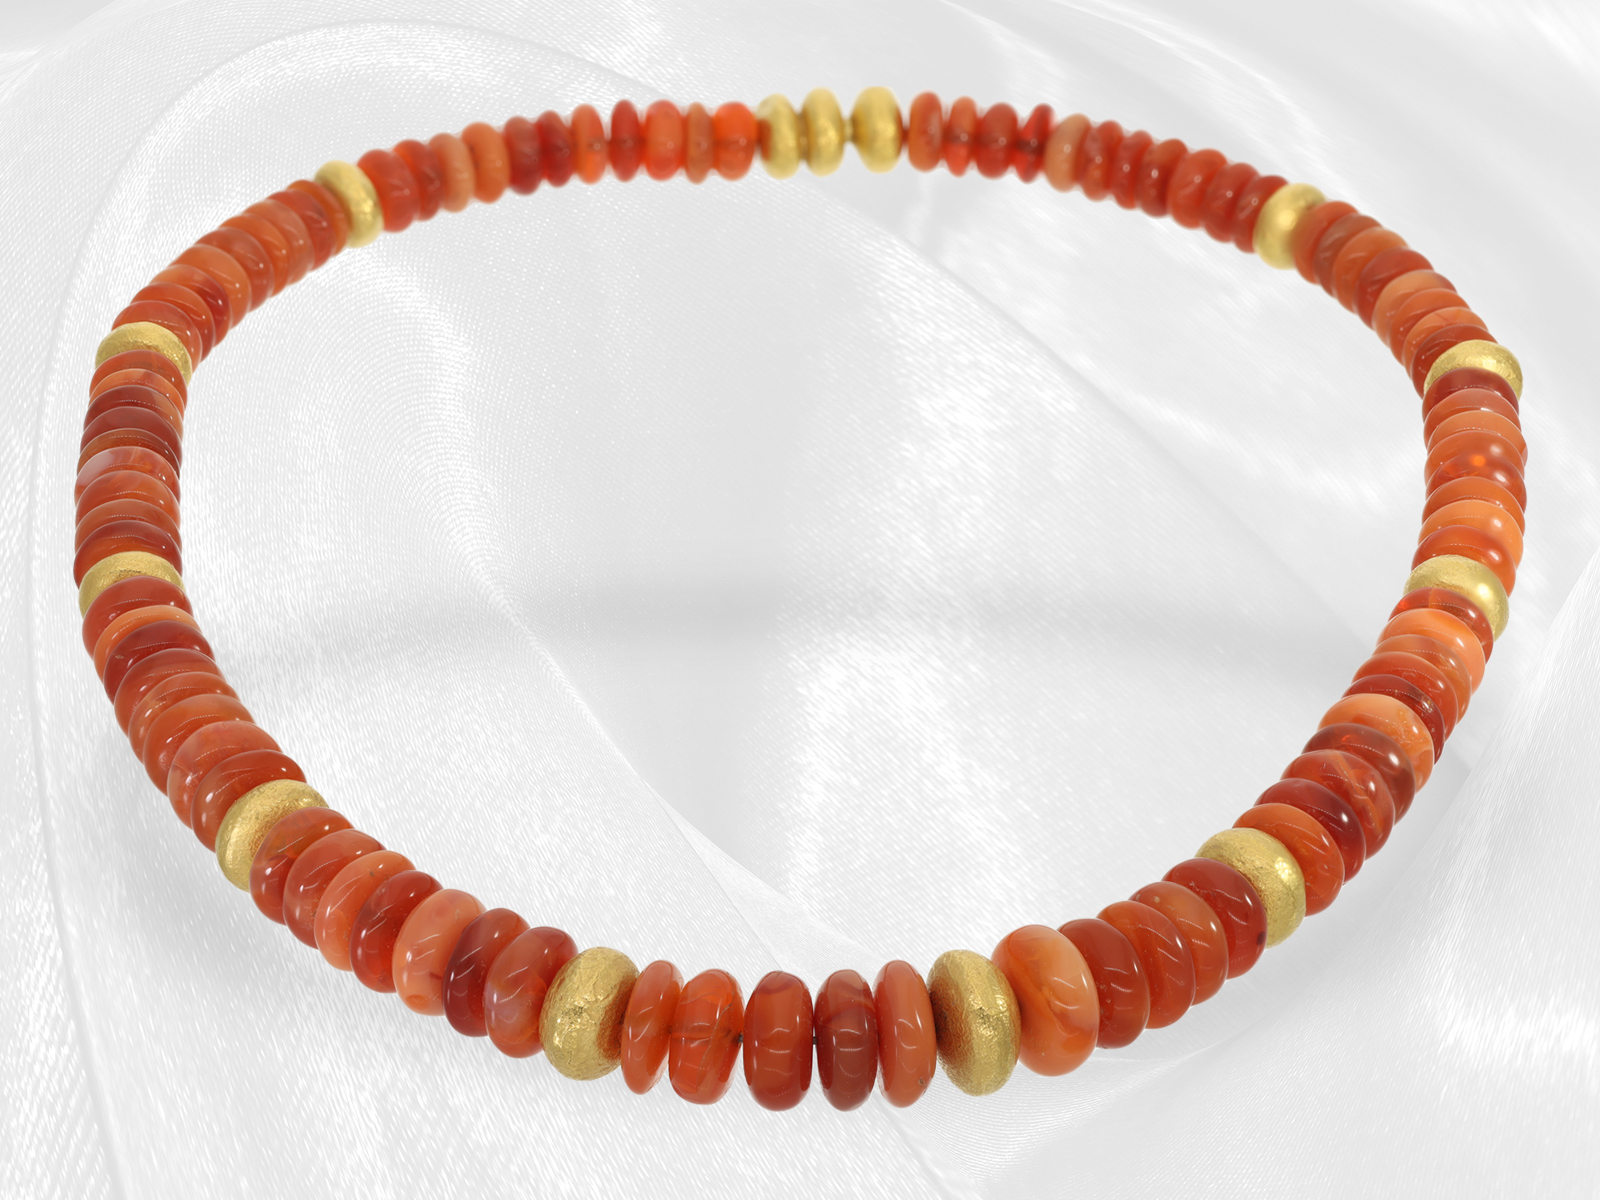 Very valuable necklace made of beautiful Mexican fire opal, like new - Image 3 of 6